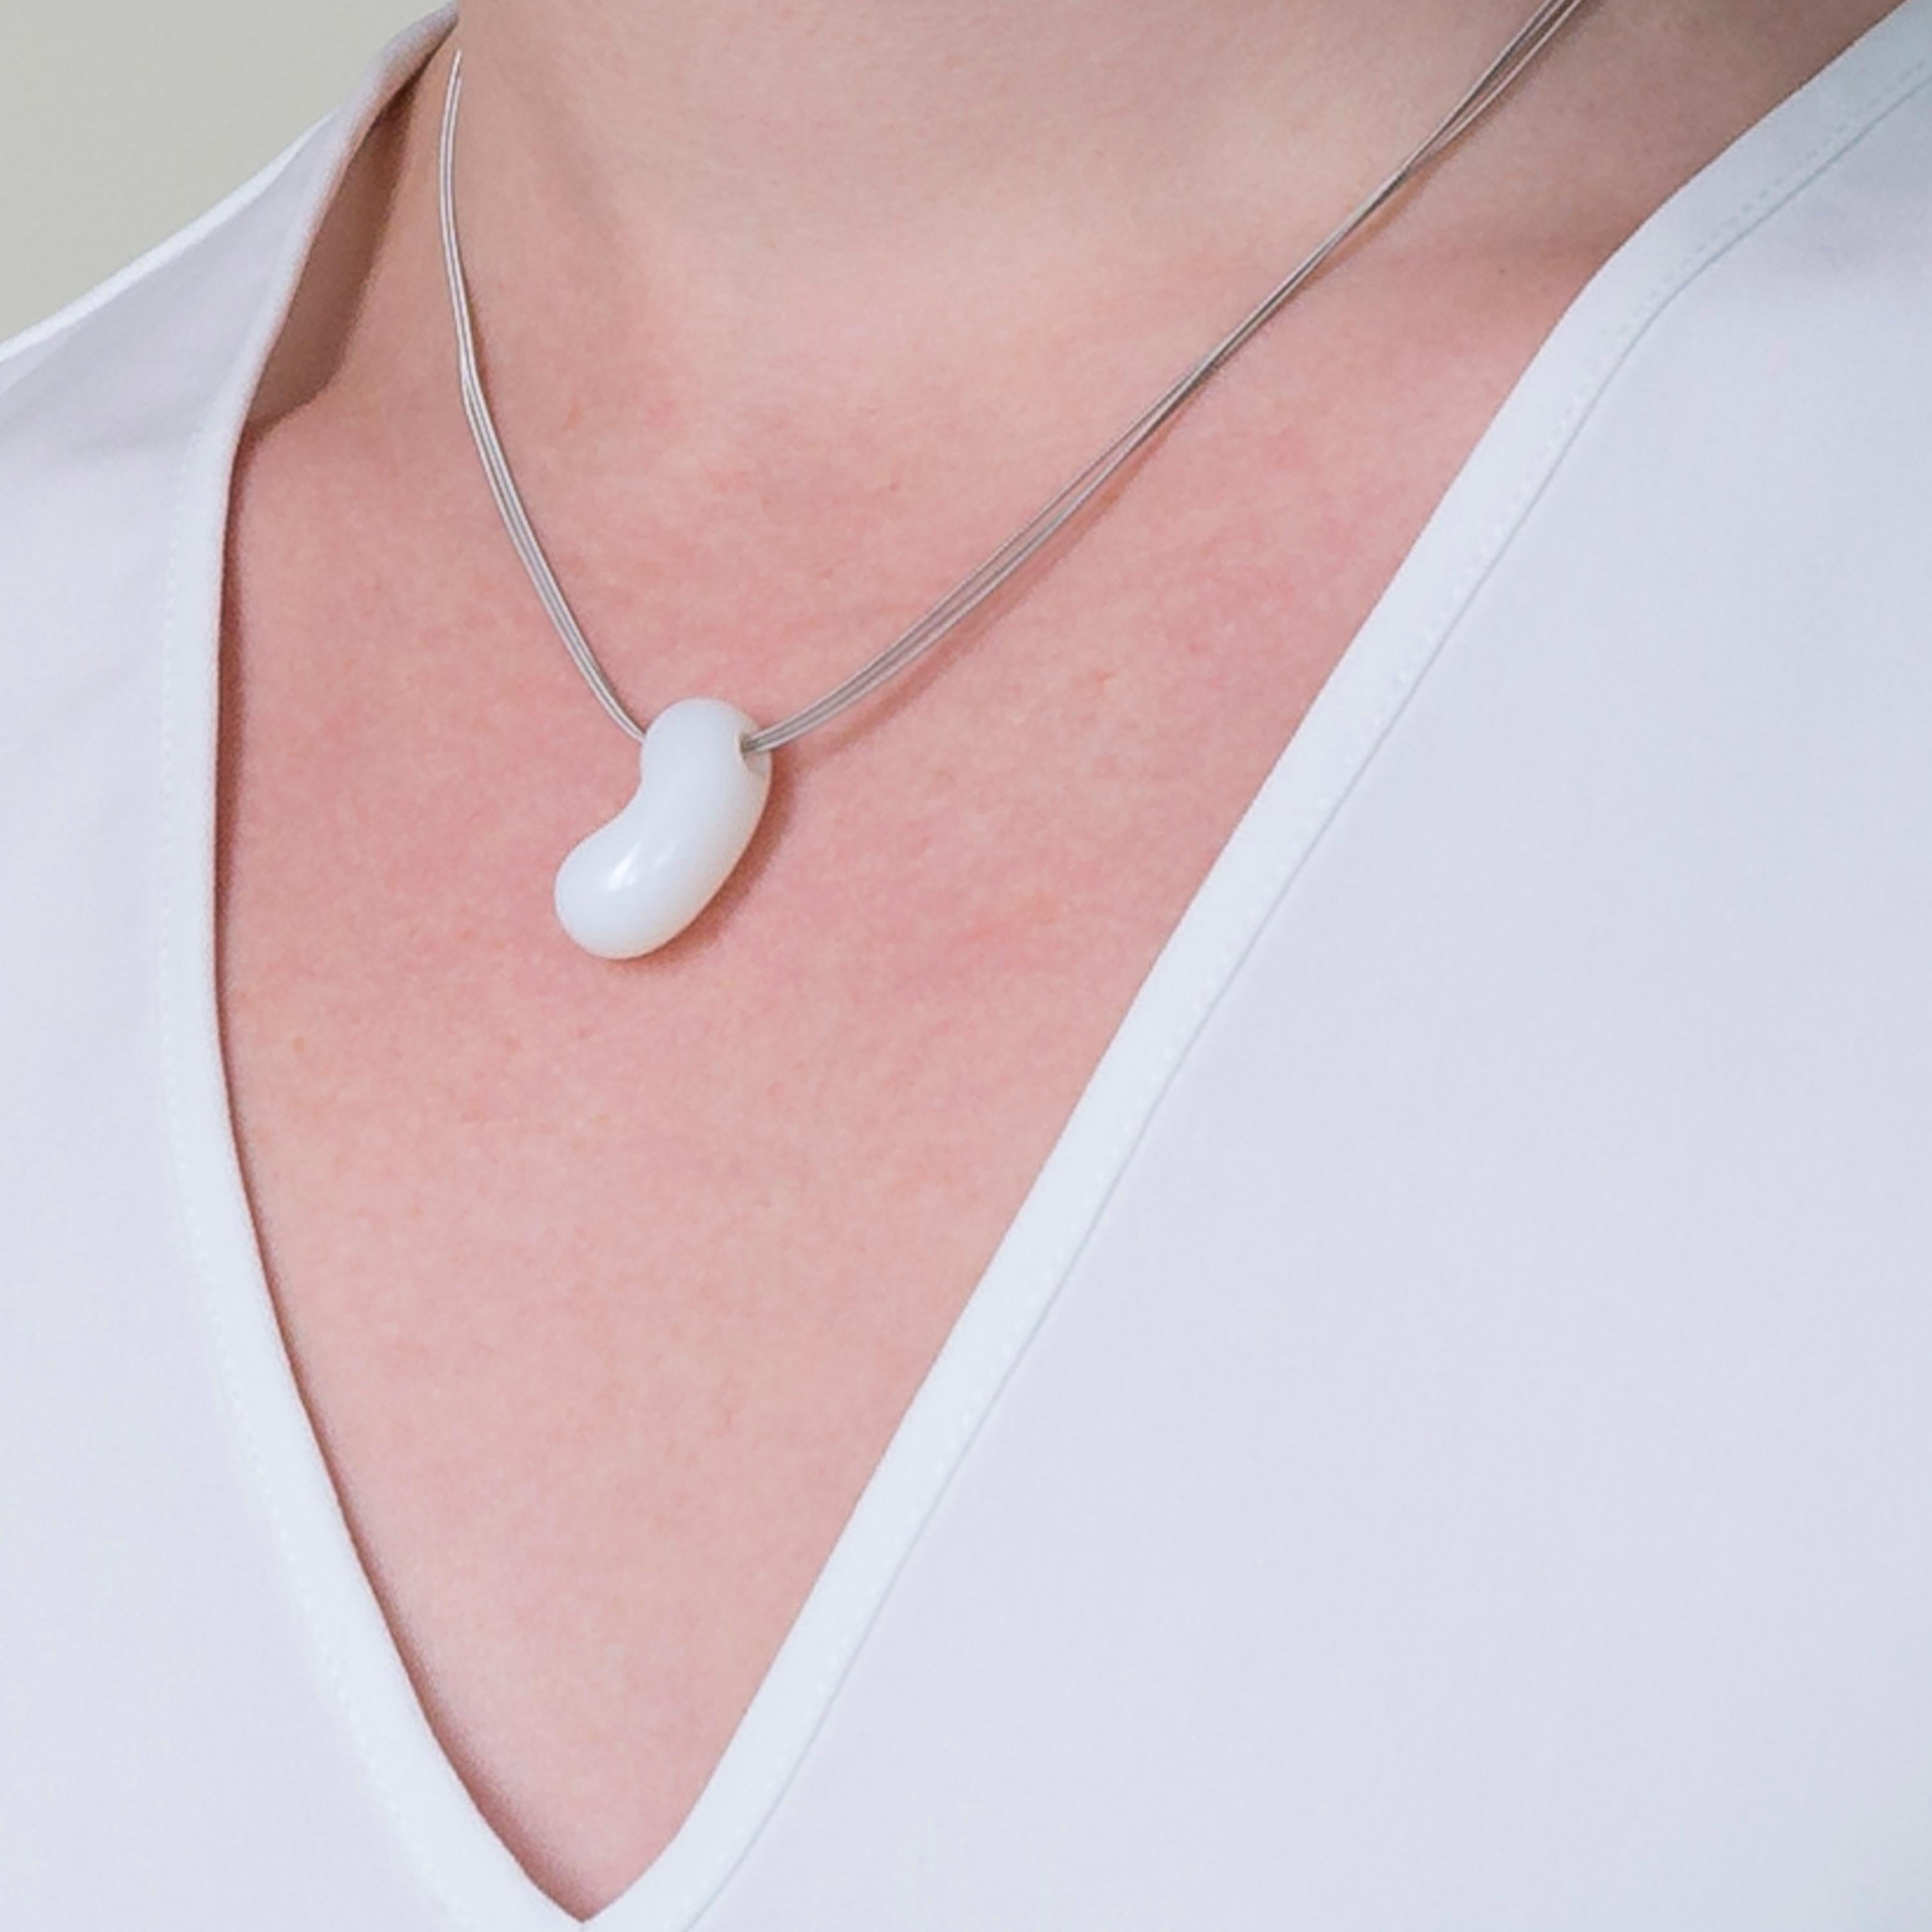 Handcarved by Dieter Lorenz, one of the top names in contemporary gem-carving, this semi-translucent white agate jellybean pendant is hung on an 18 Karat White Gold multi strand necklace.

Made by hand in our family run Northern Irish jewellery